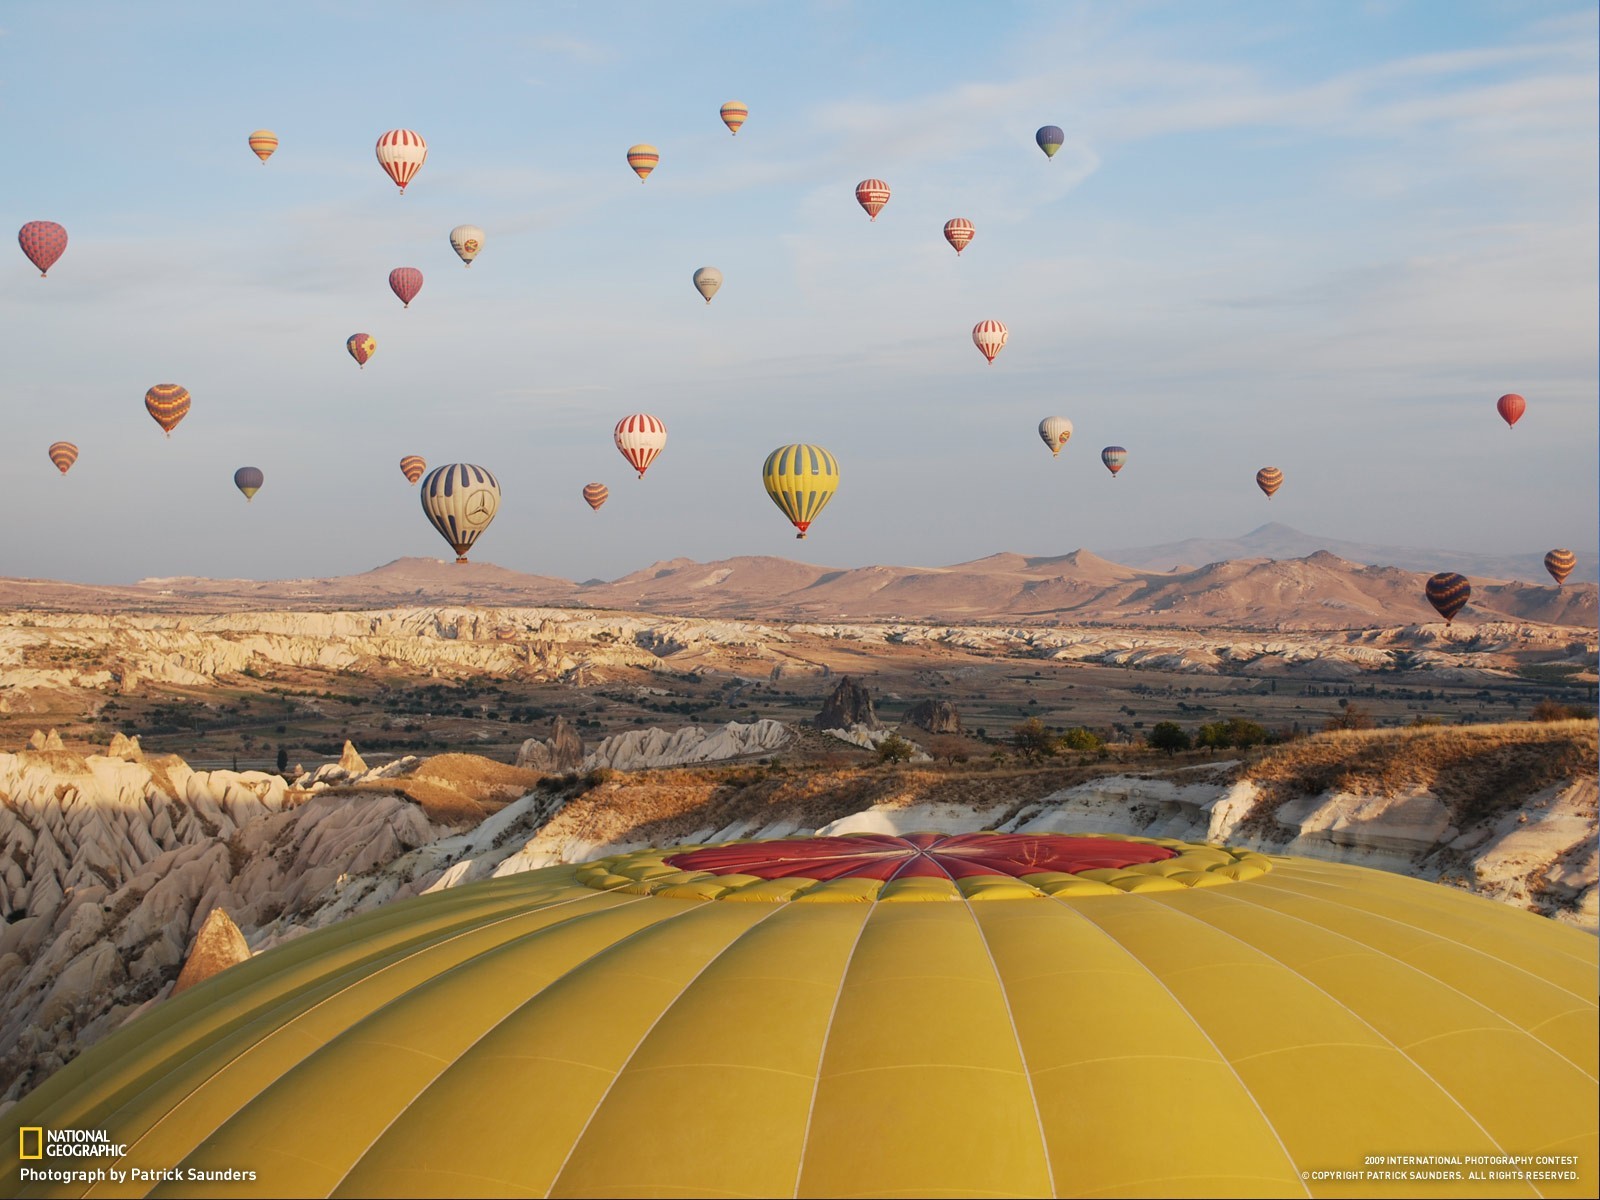 General 1600x1200 sky National Geographic hot air balloons landscape vehicle 2009 (Year)